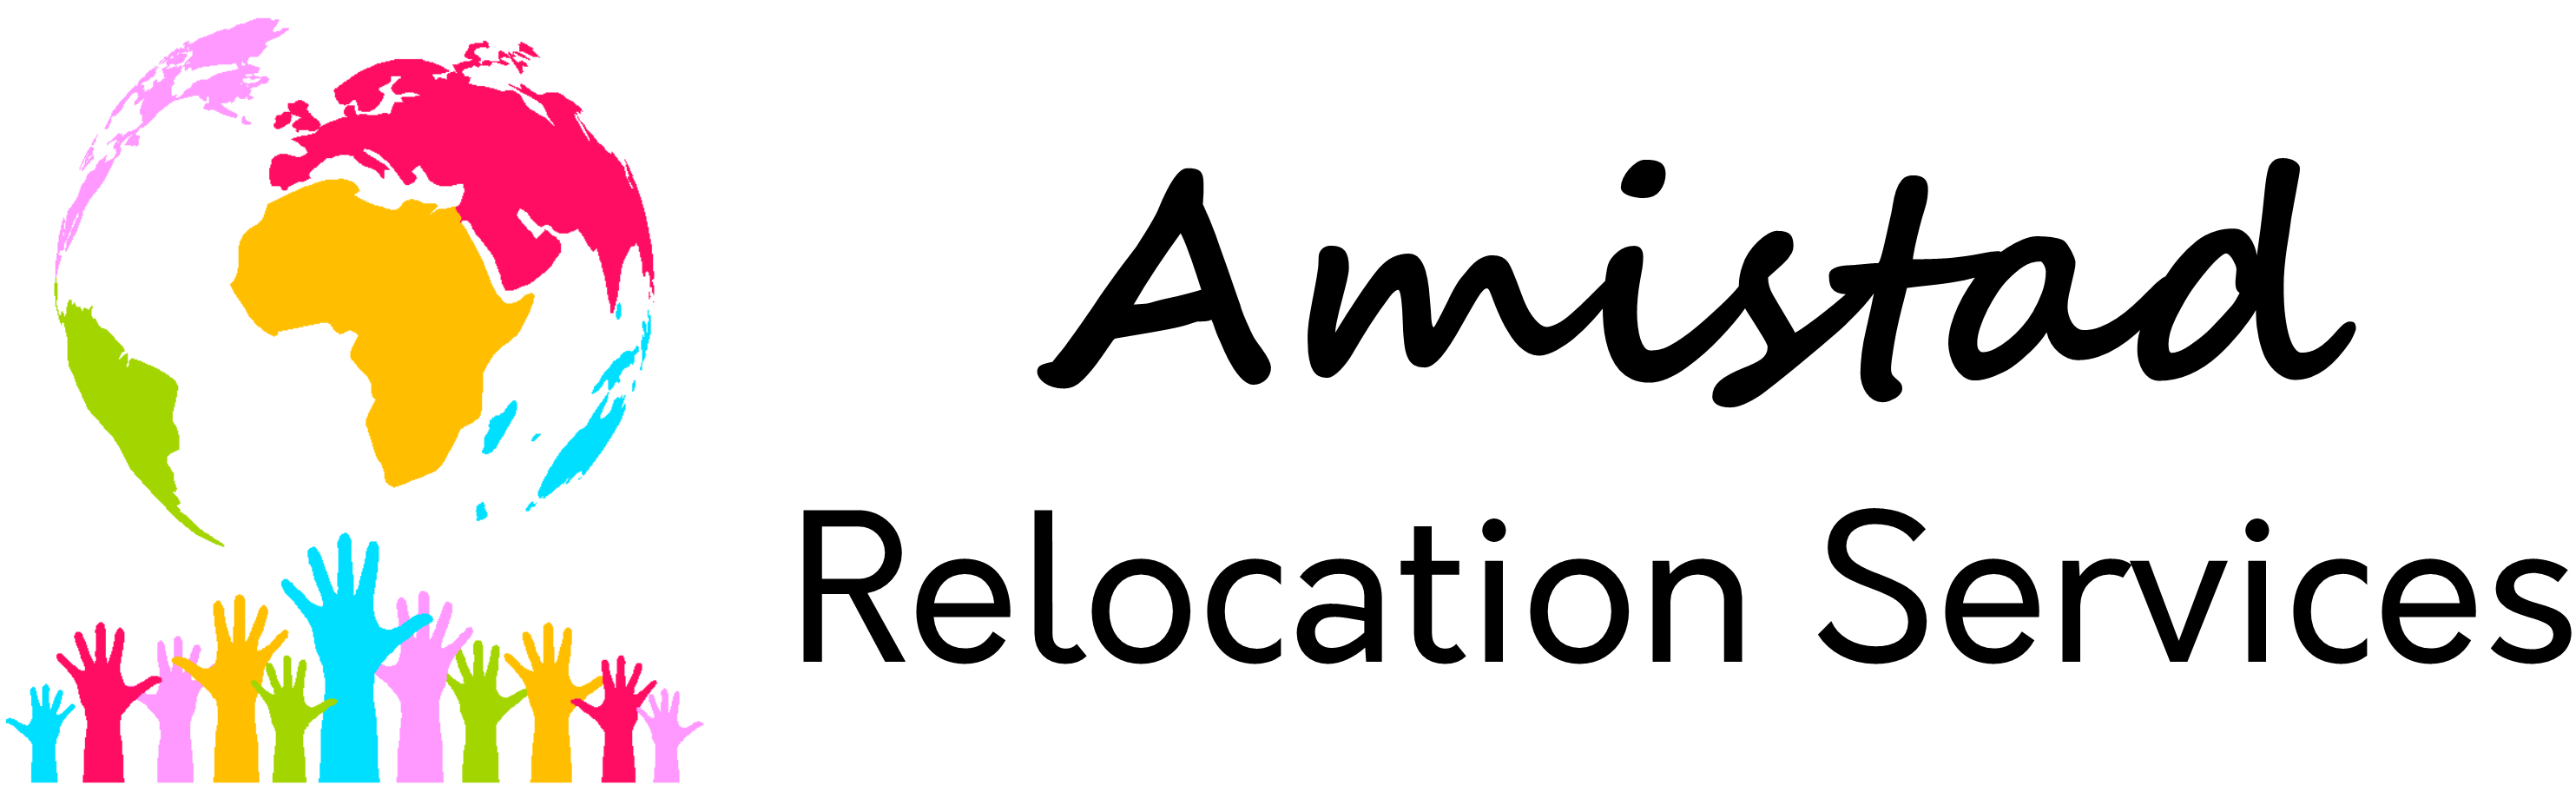 AMISTAD RELOCATION SERVICES